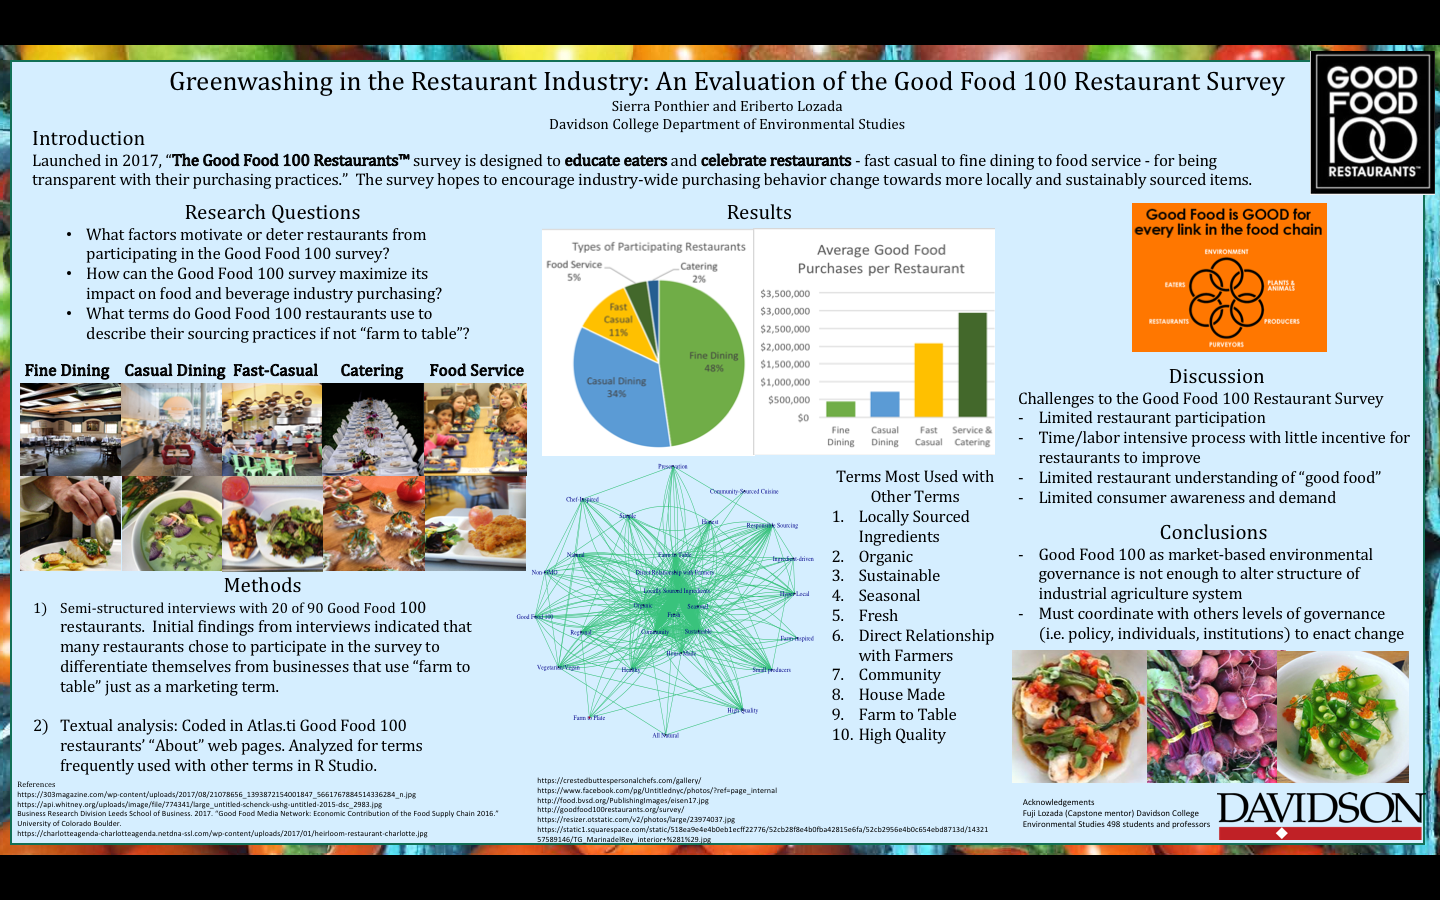 Thesis Research: Evaluating the Good Food 100 Restaurant Survey